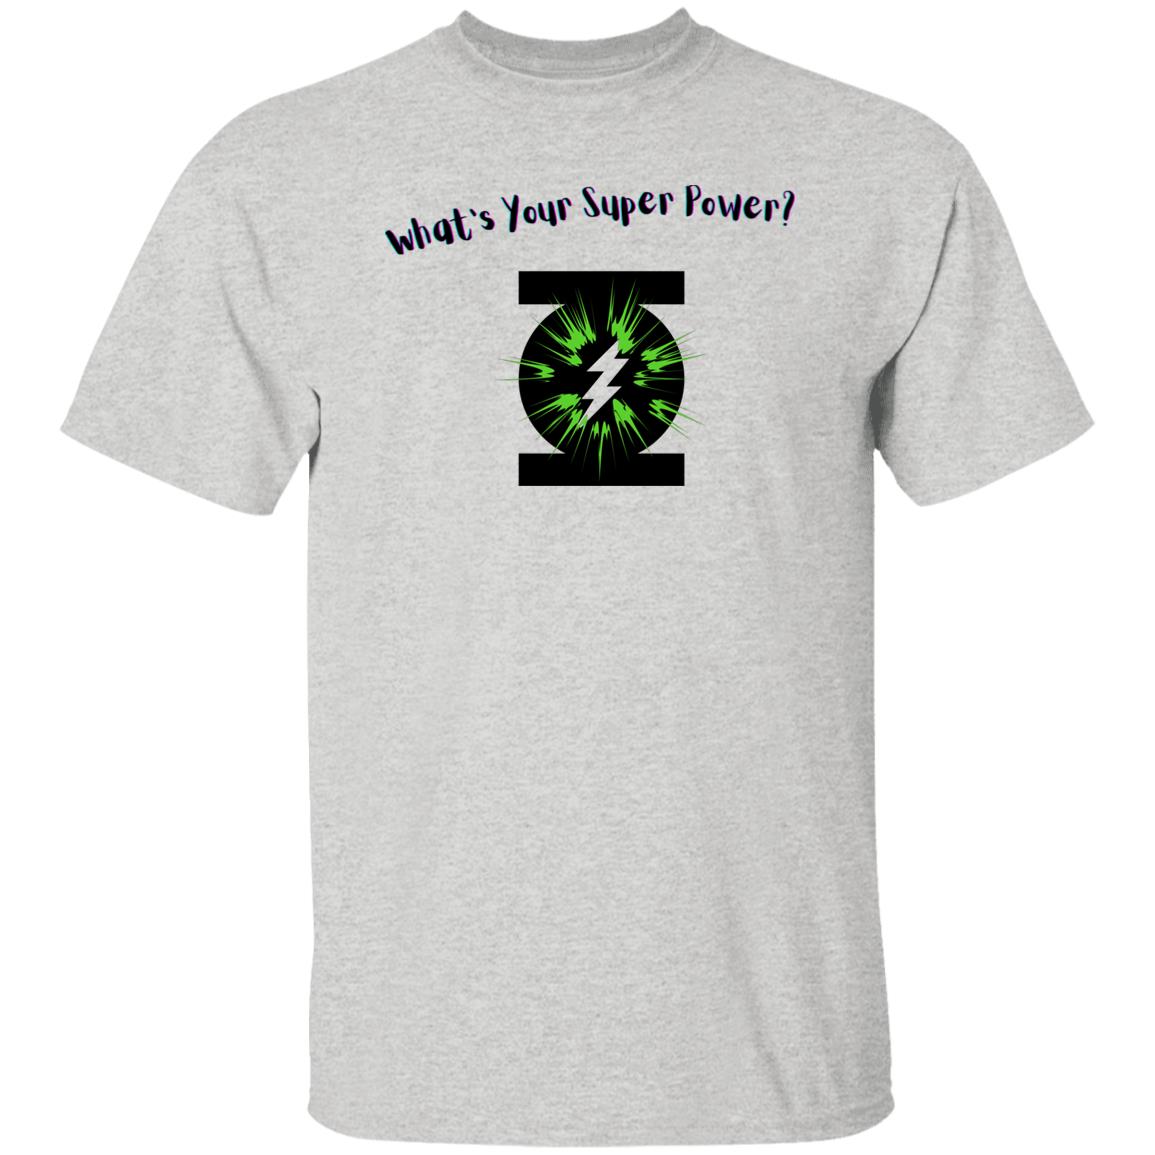 What's Your Power Cotton Super Tee